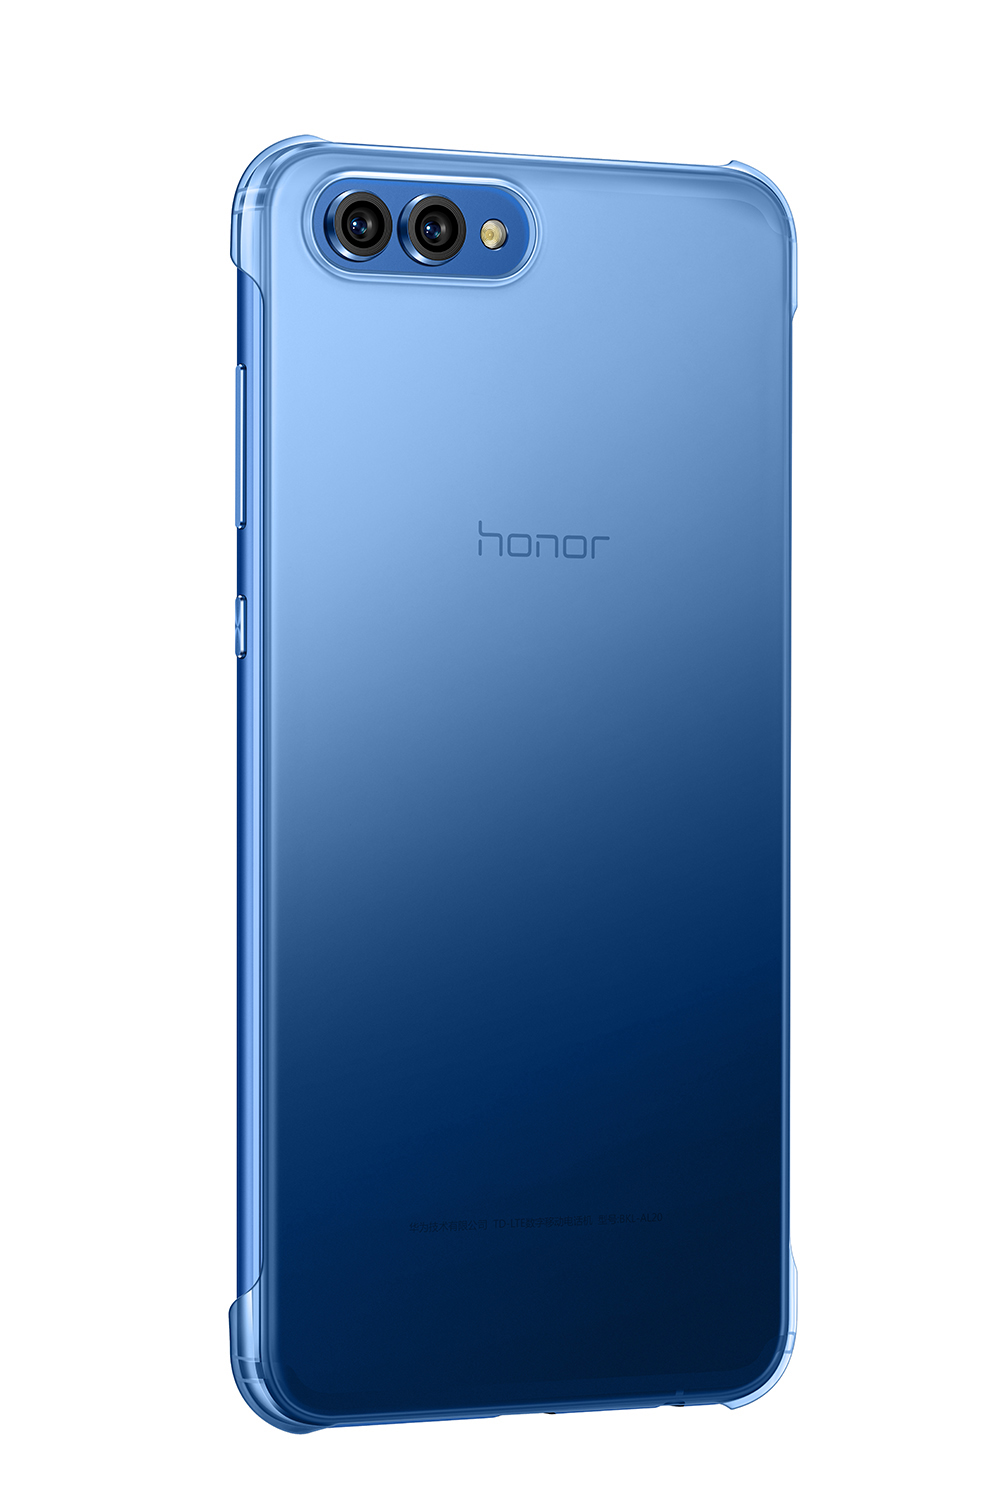 HONOR Magnet, Backcover, Blau View Honor, 10